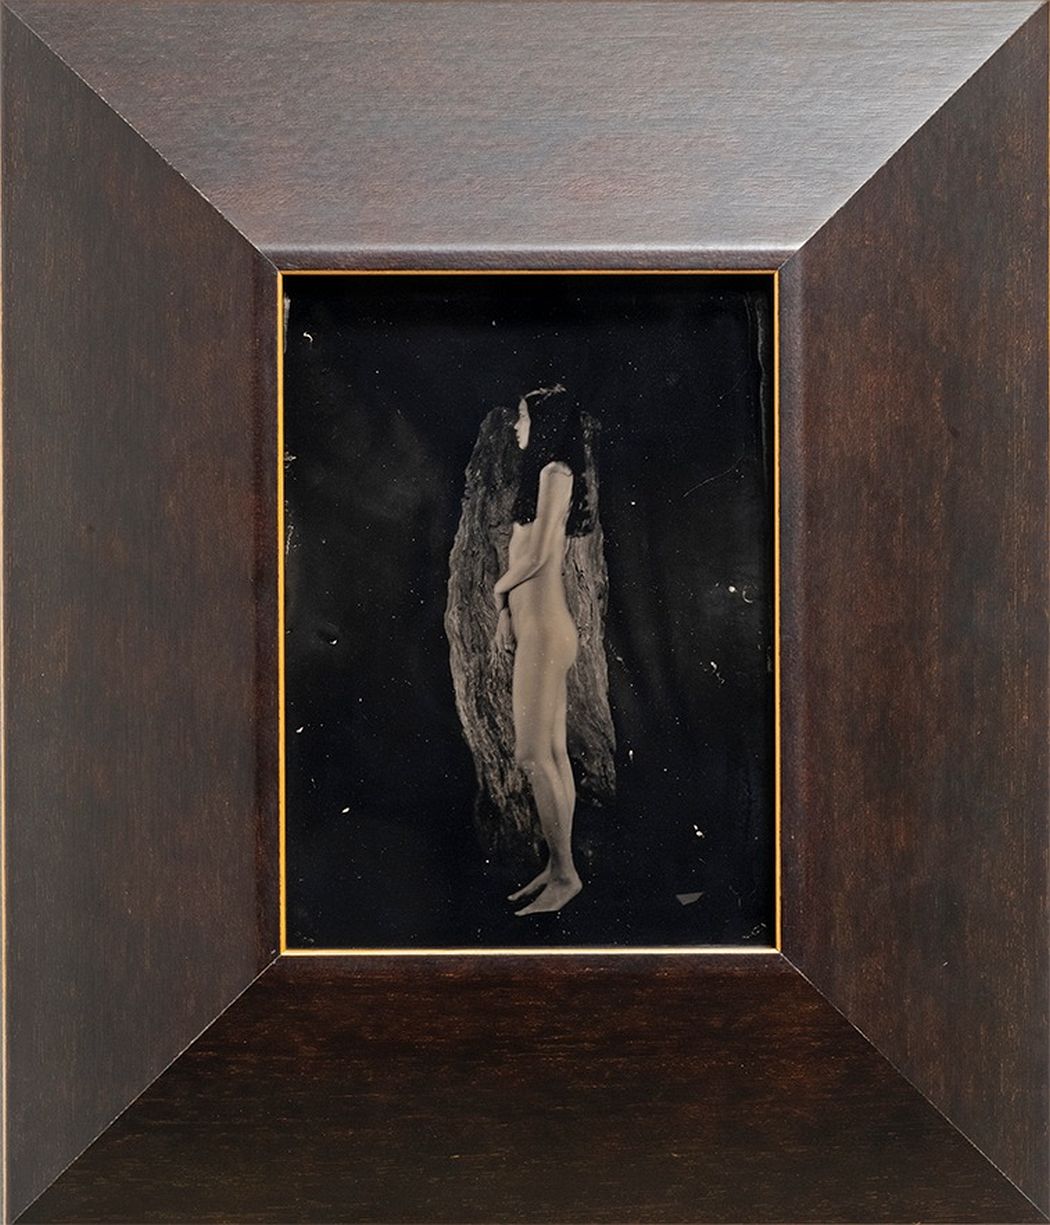 Yamamoto Masao, Untitled (AM #1), 2023. Unique collodion Ambrotype, image size: 7 x 5 1/8 inches, frame size: 12 1/2 x 10 5/8 inches.